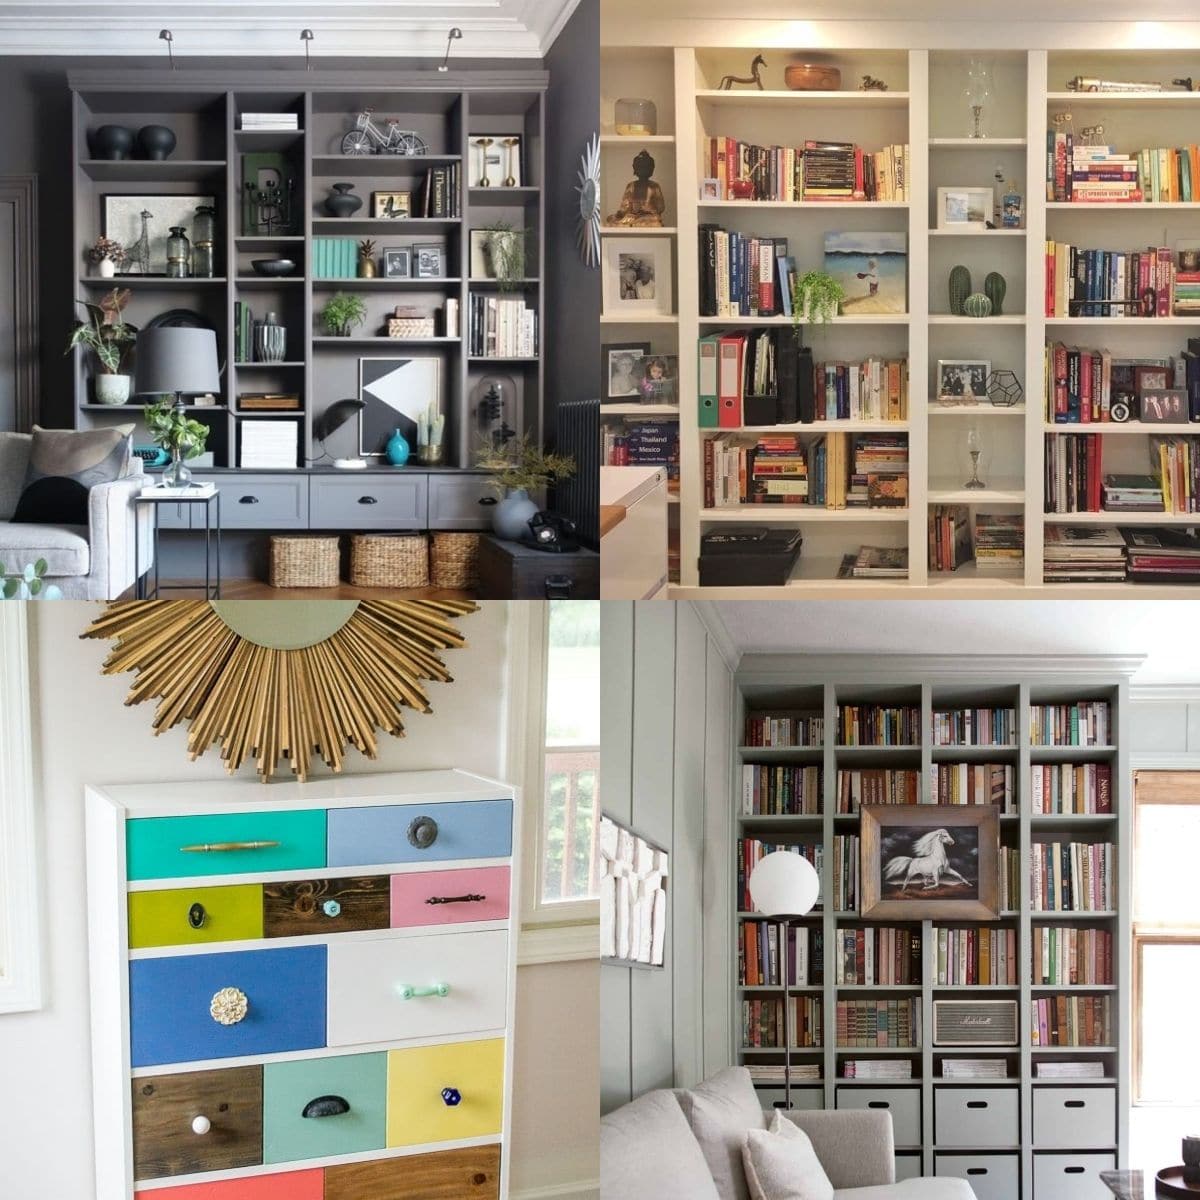 20 Unique Ikea Billy Bookcase S, How To Strengthen Billy Bookcase